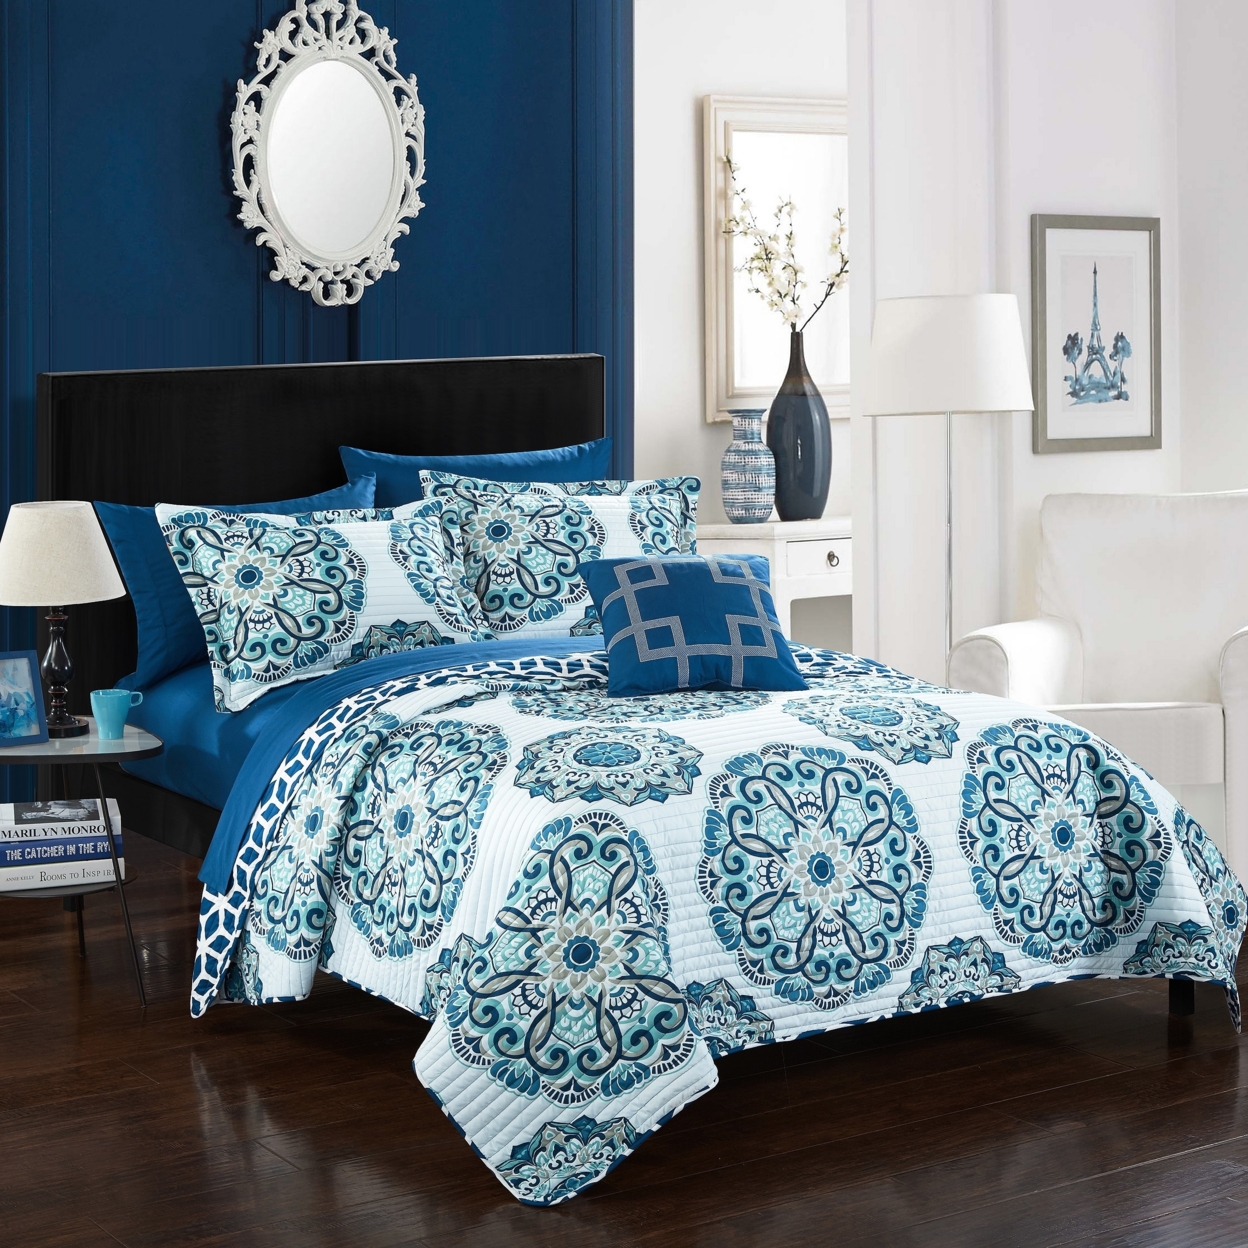 2/3 Piece Majorca Super Soft Microfiber Large Printed Medallion REVERSIBLE With Geometric Printed Backing Duvet Set - Blue, Full/Queen